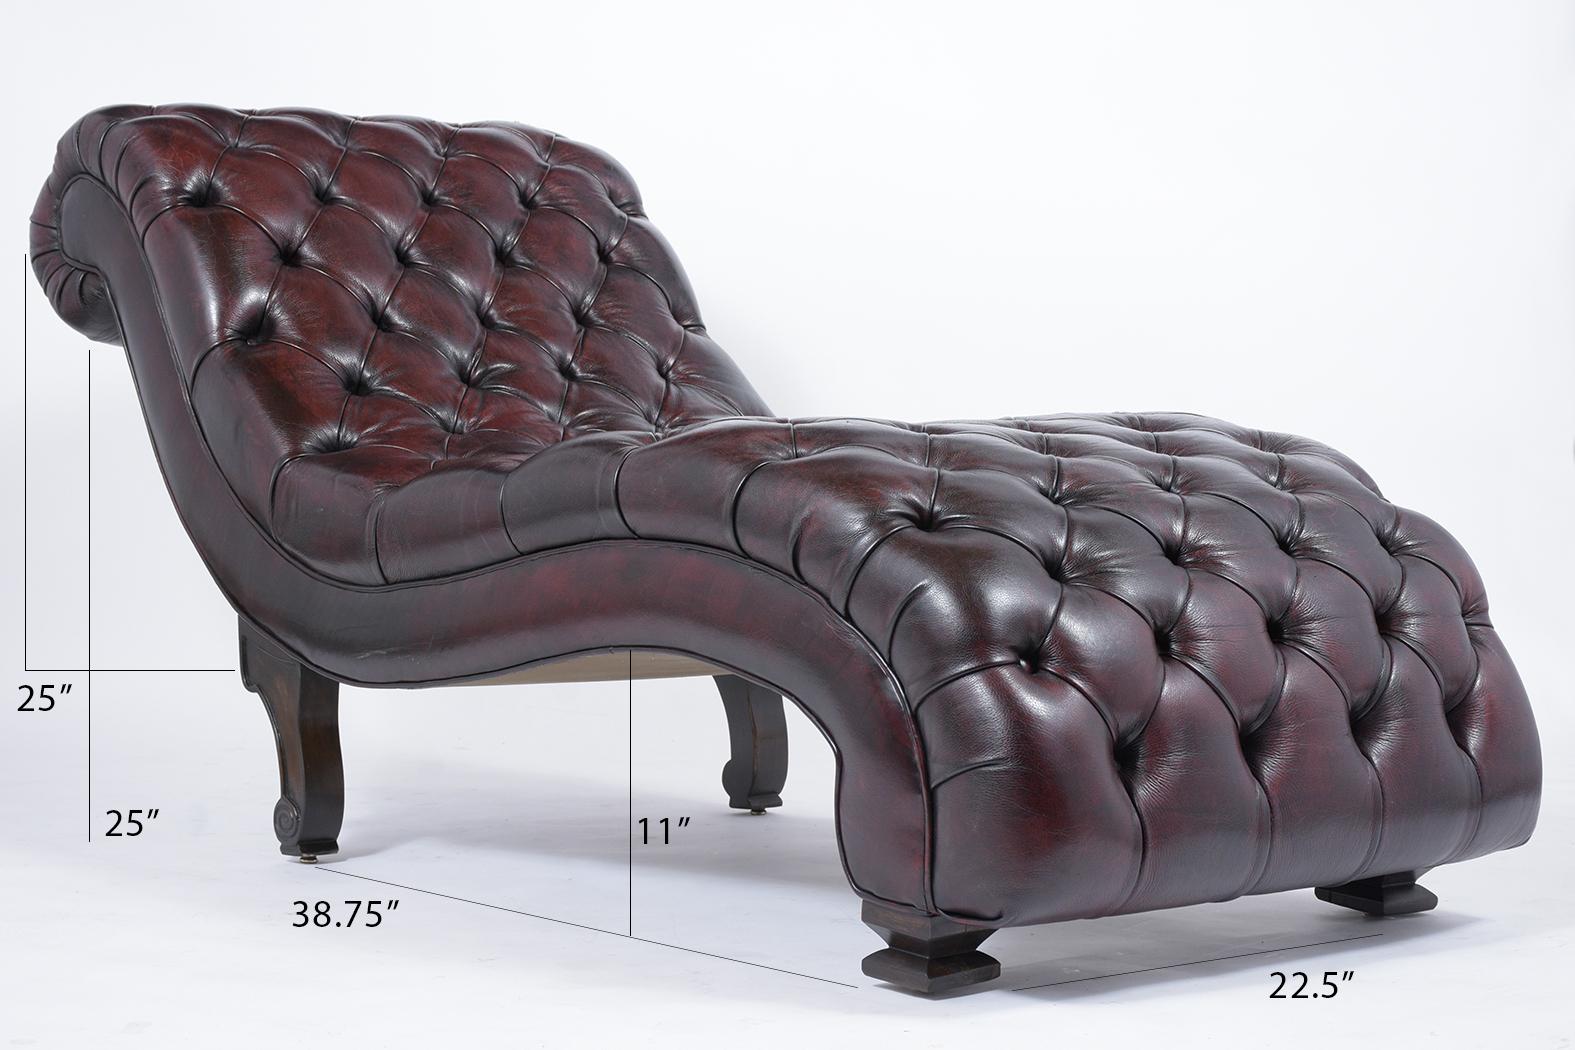 Chesterfield Vintage Tufted Chaise Lounge